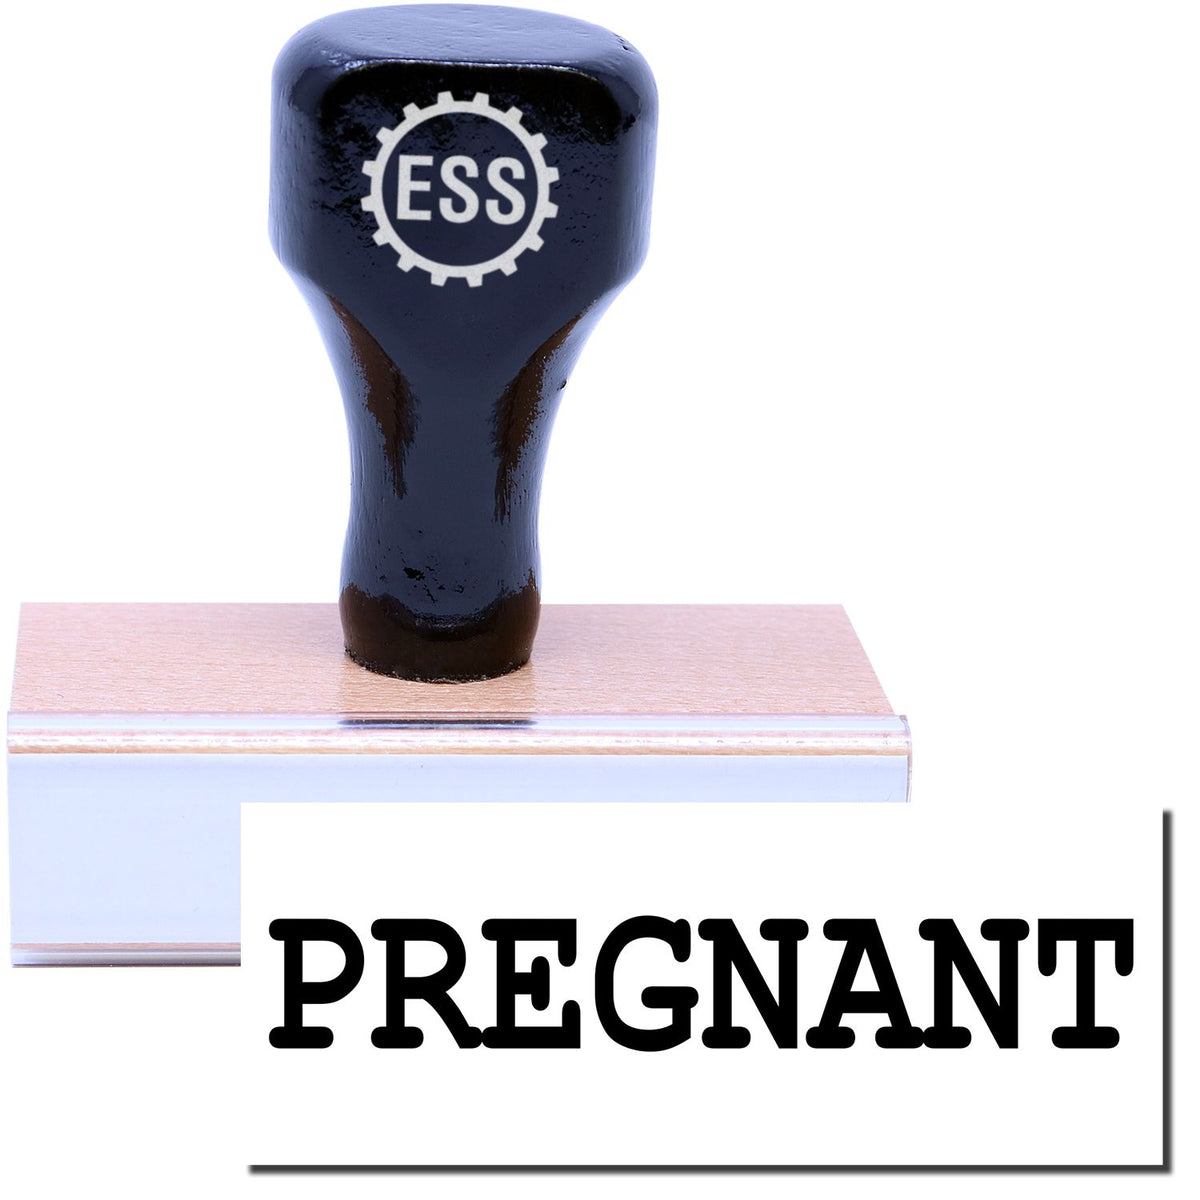 A stock office rubber stamp with a stamped image showing how the text &quot;PREGNANT&quot; in a large font is displayed after stamping.